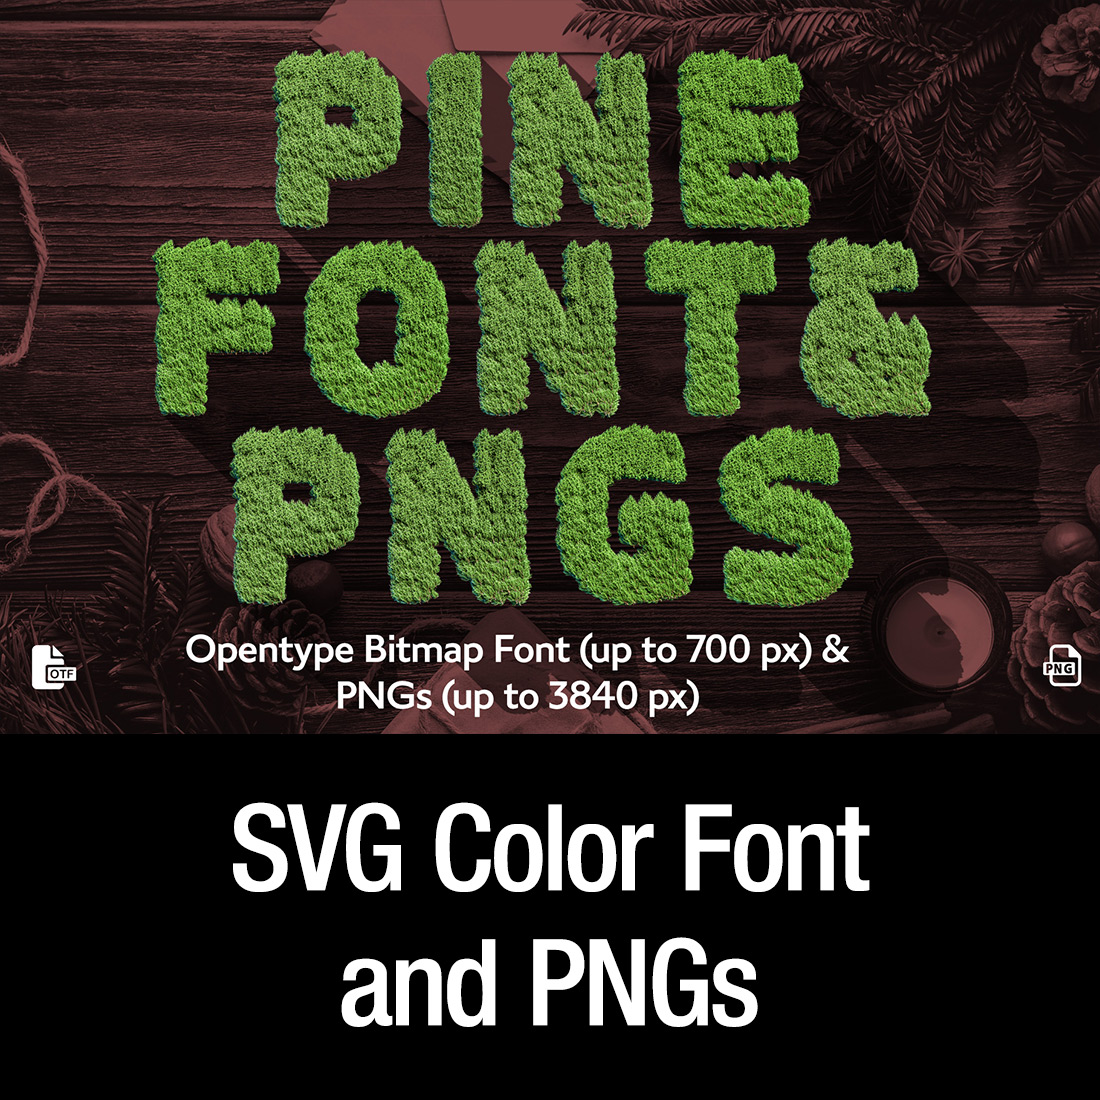 MS Pine Bitmap Font and PNG Design cover image.